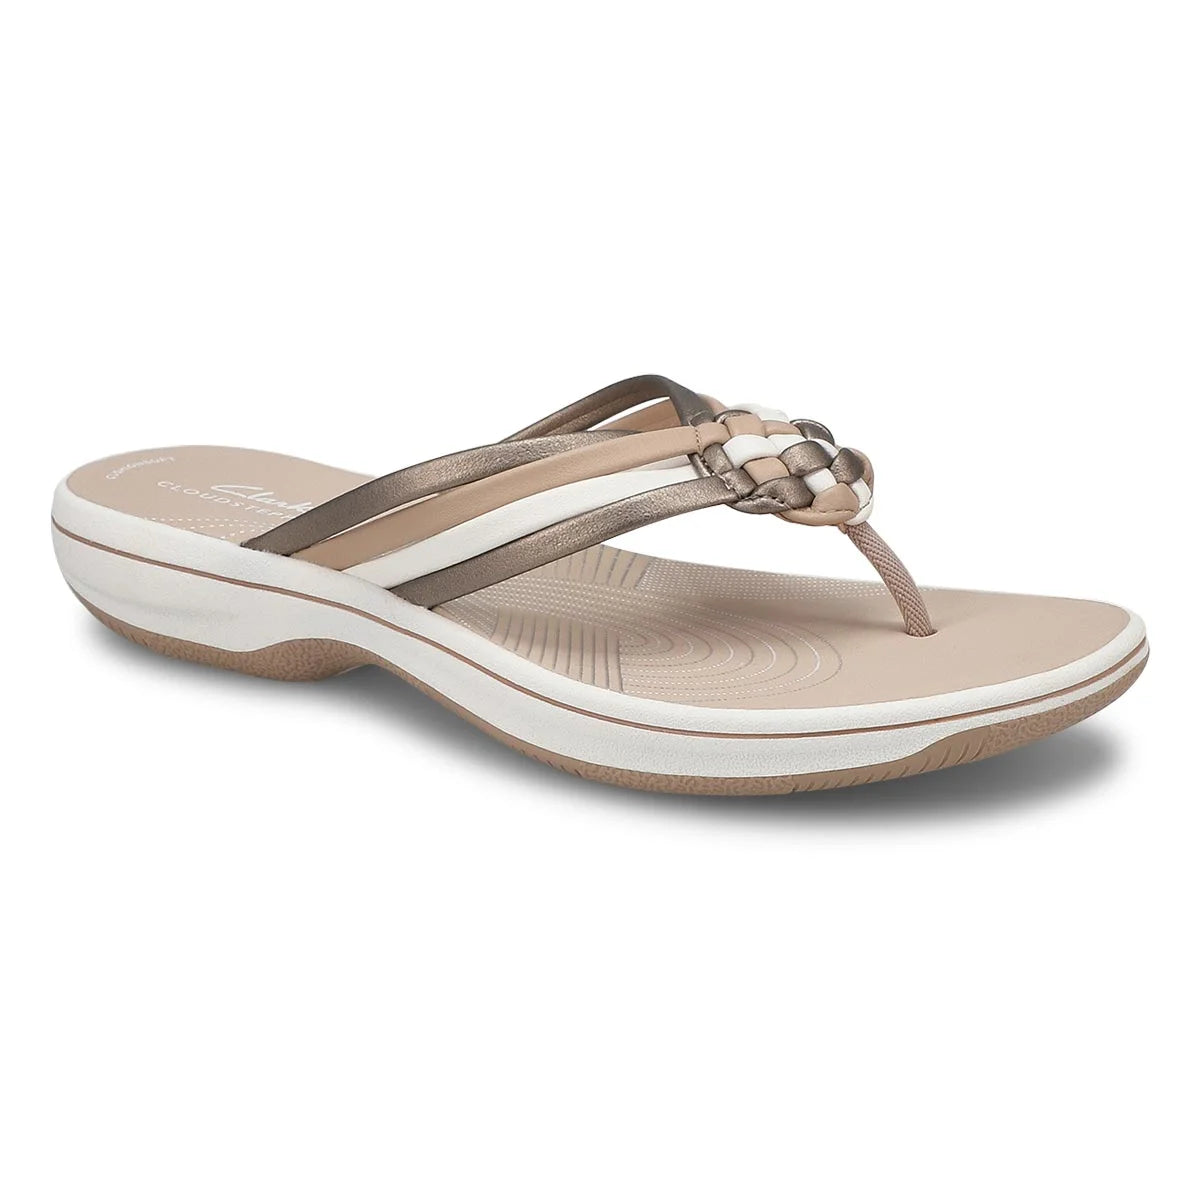 Clarks Breeze Coral Slip-On Thong Sandals